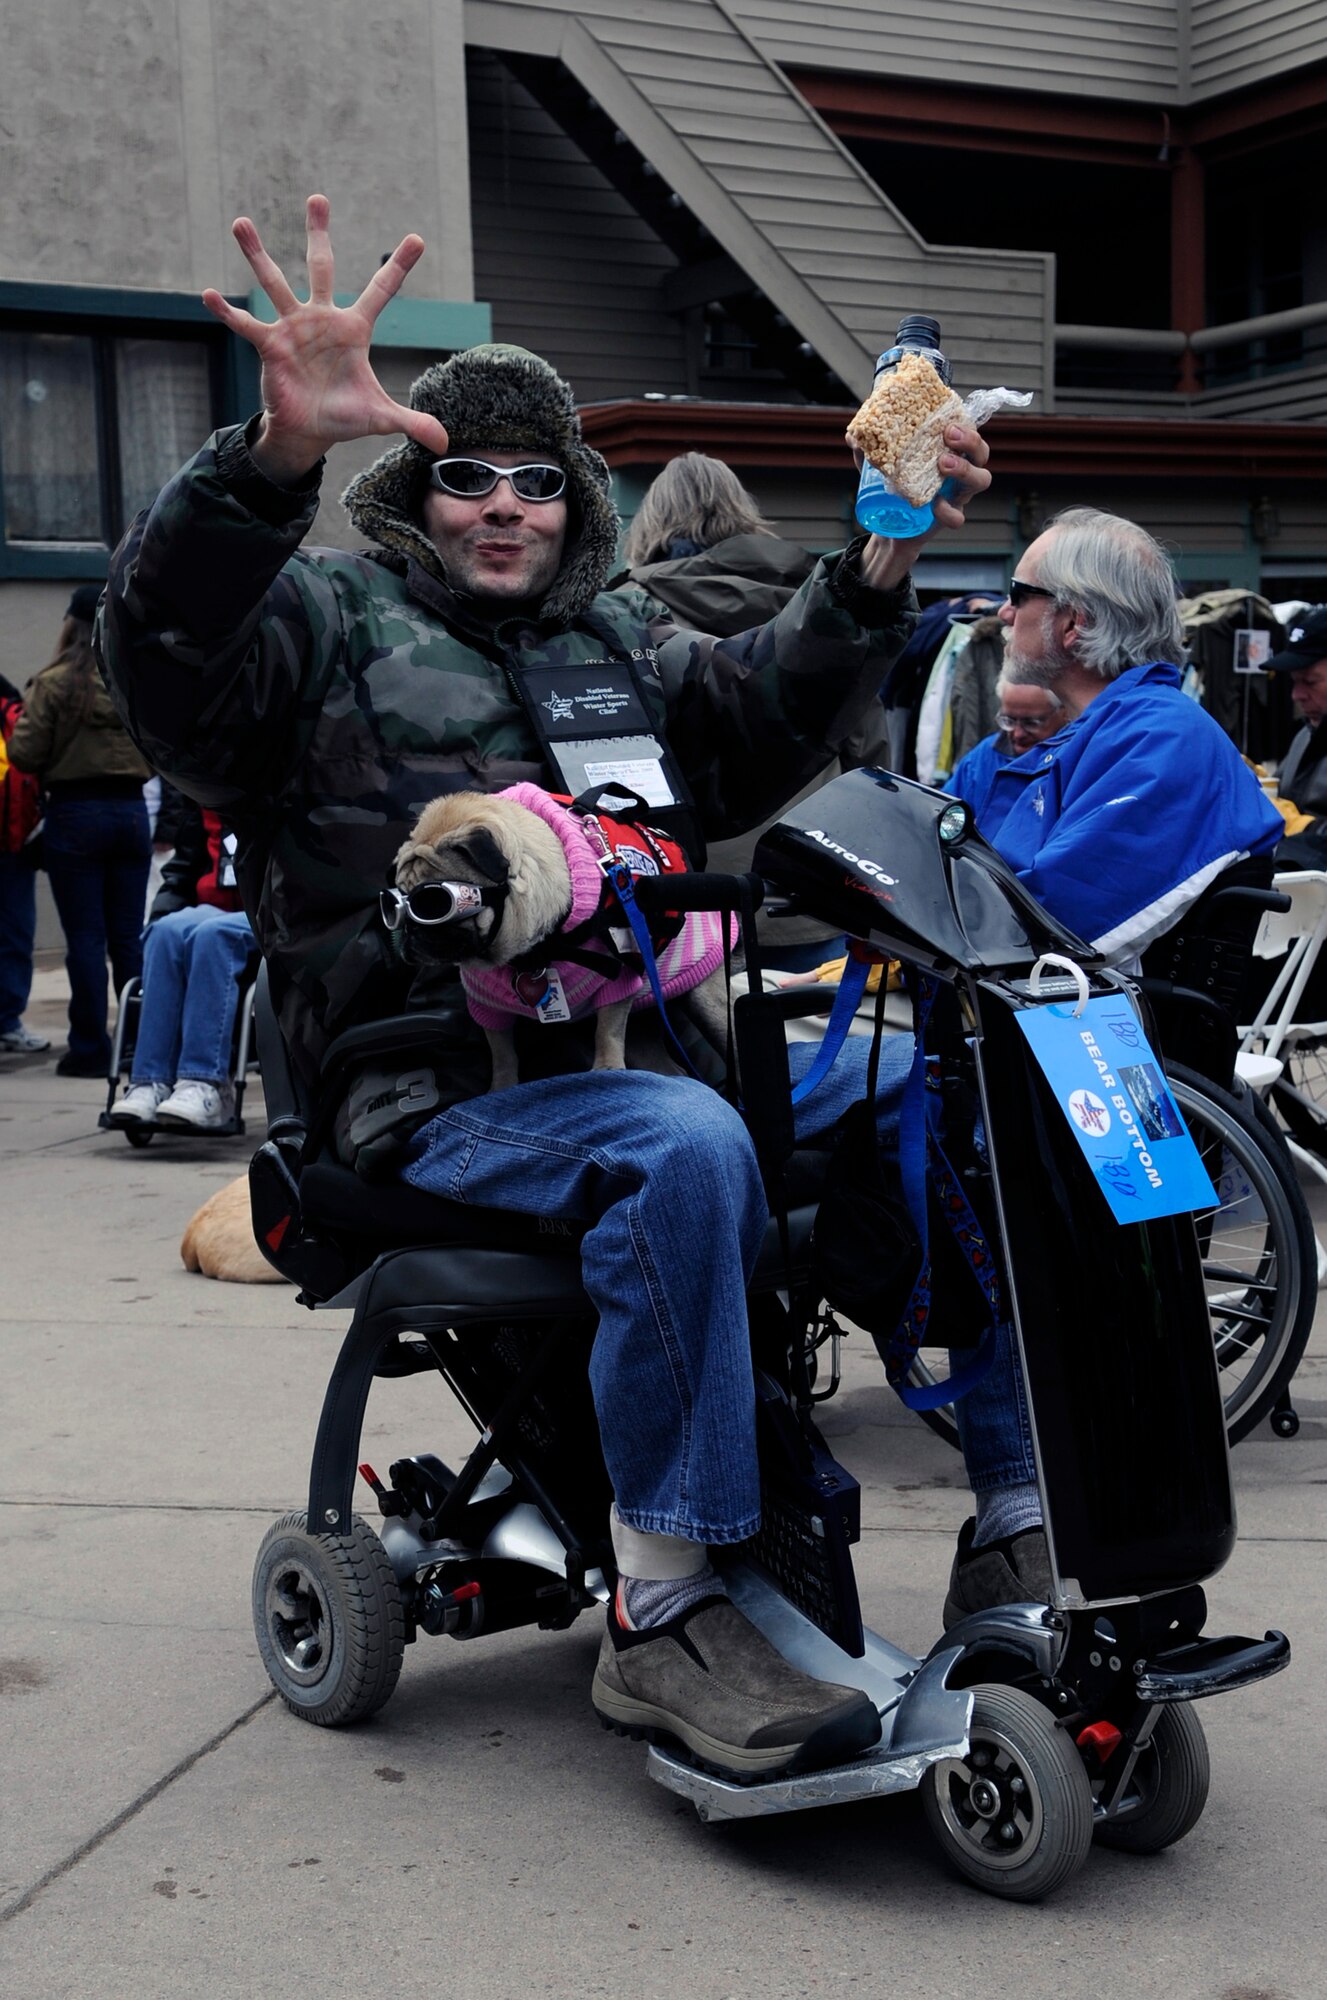 Mark Kline and his dog, Sage, attend the "Taste of Snowmass" March 29 for the 23rd National Disabled American Veterans Winter Sports Clinic in Snowmass Village, Colo. Mr. Kline was formerly in the Army and is from Mexico, N.Y. (U.S. Air Force photo/Staff Sgt. Desiree N. Palacios)